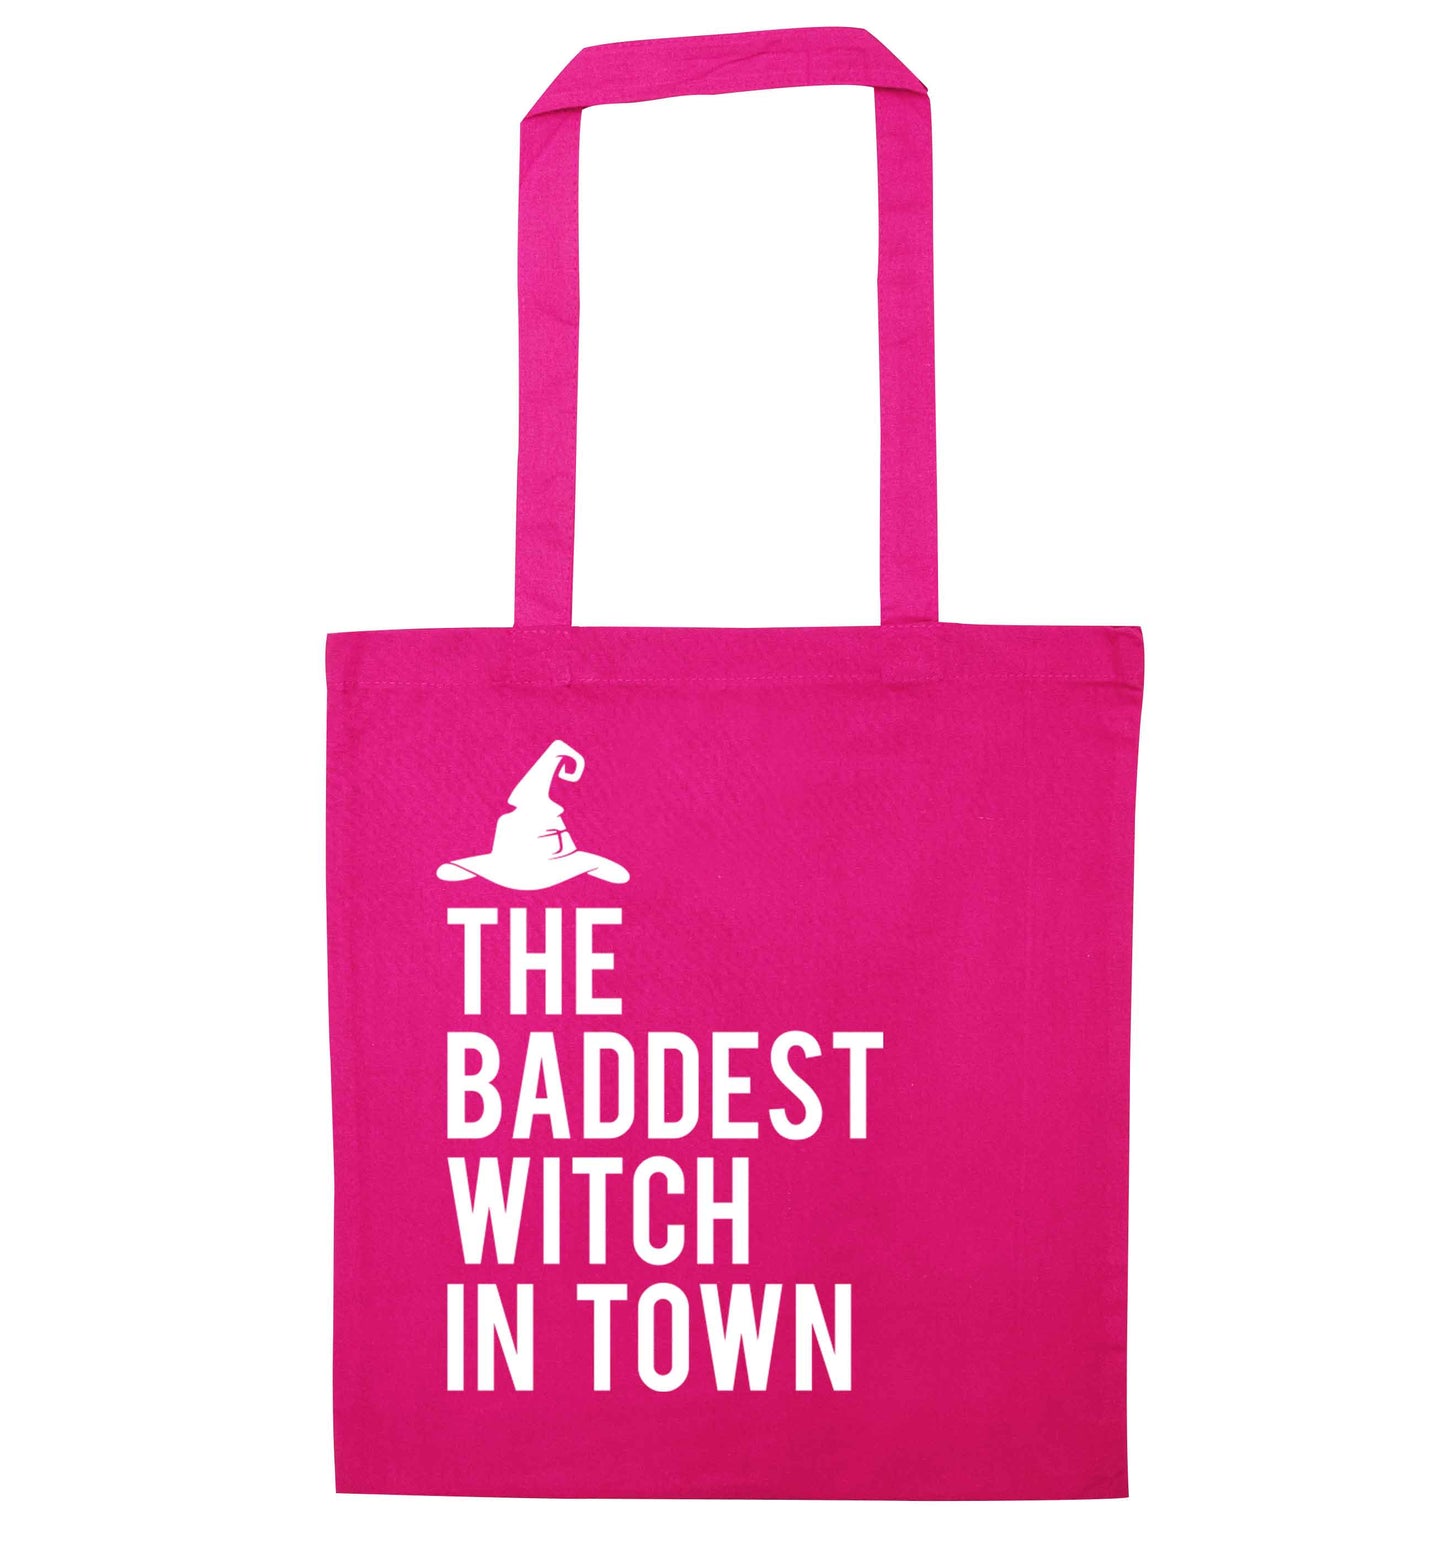 Badest witch in town pink tote bag